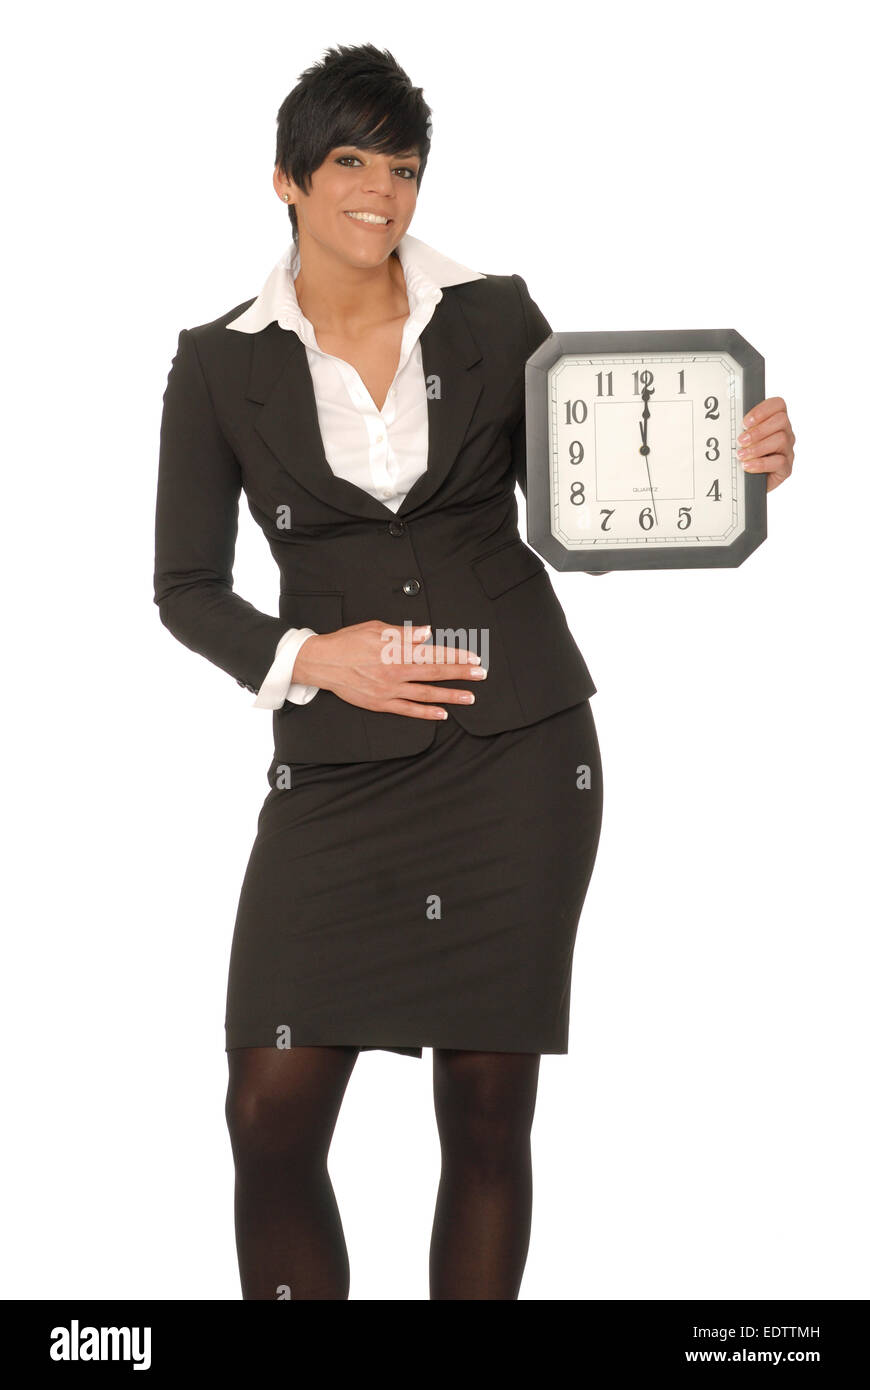 Business woman holding a clock that reads 12 o'clock, and gesturing to her stomach.  Can represent lunchtime hunger. Stock Photo